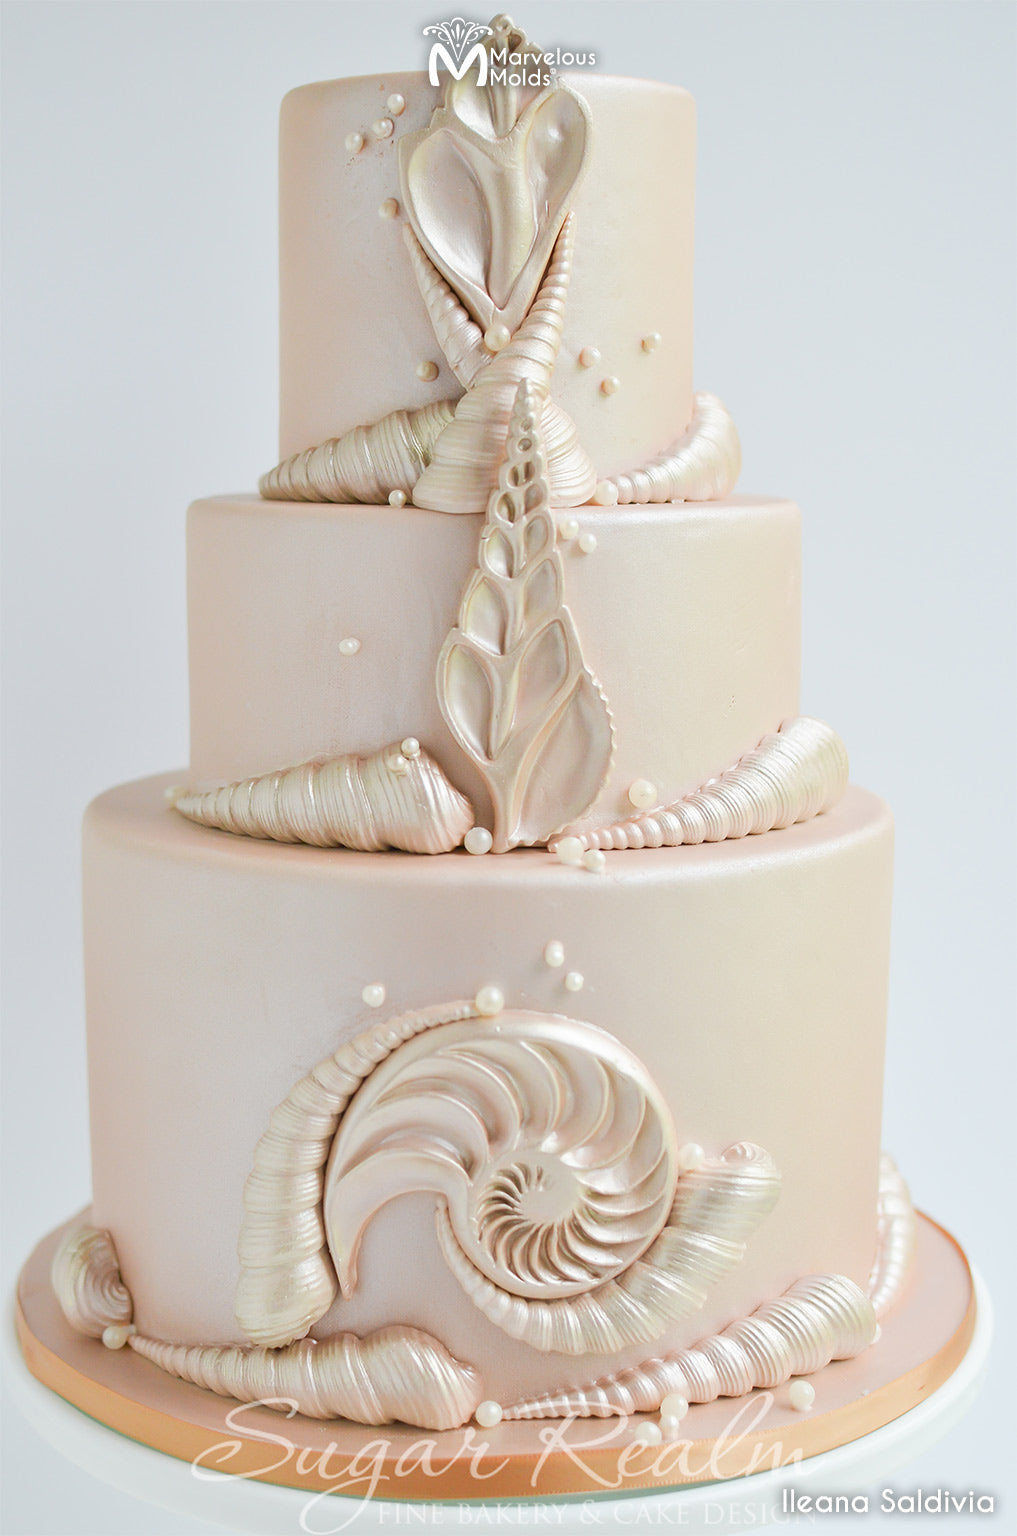 Off-White Wedding Cake Decorated Using Marvelous Molds Cross-Cut Conch Shell Mold